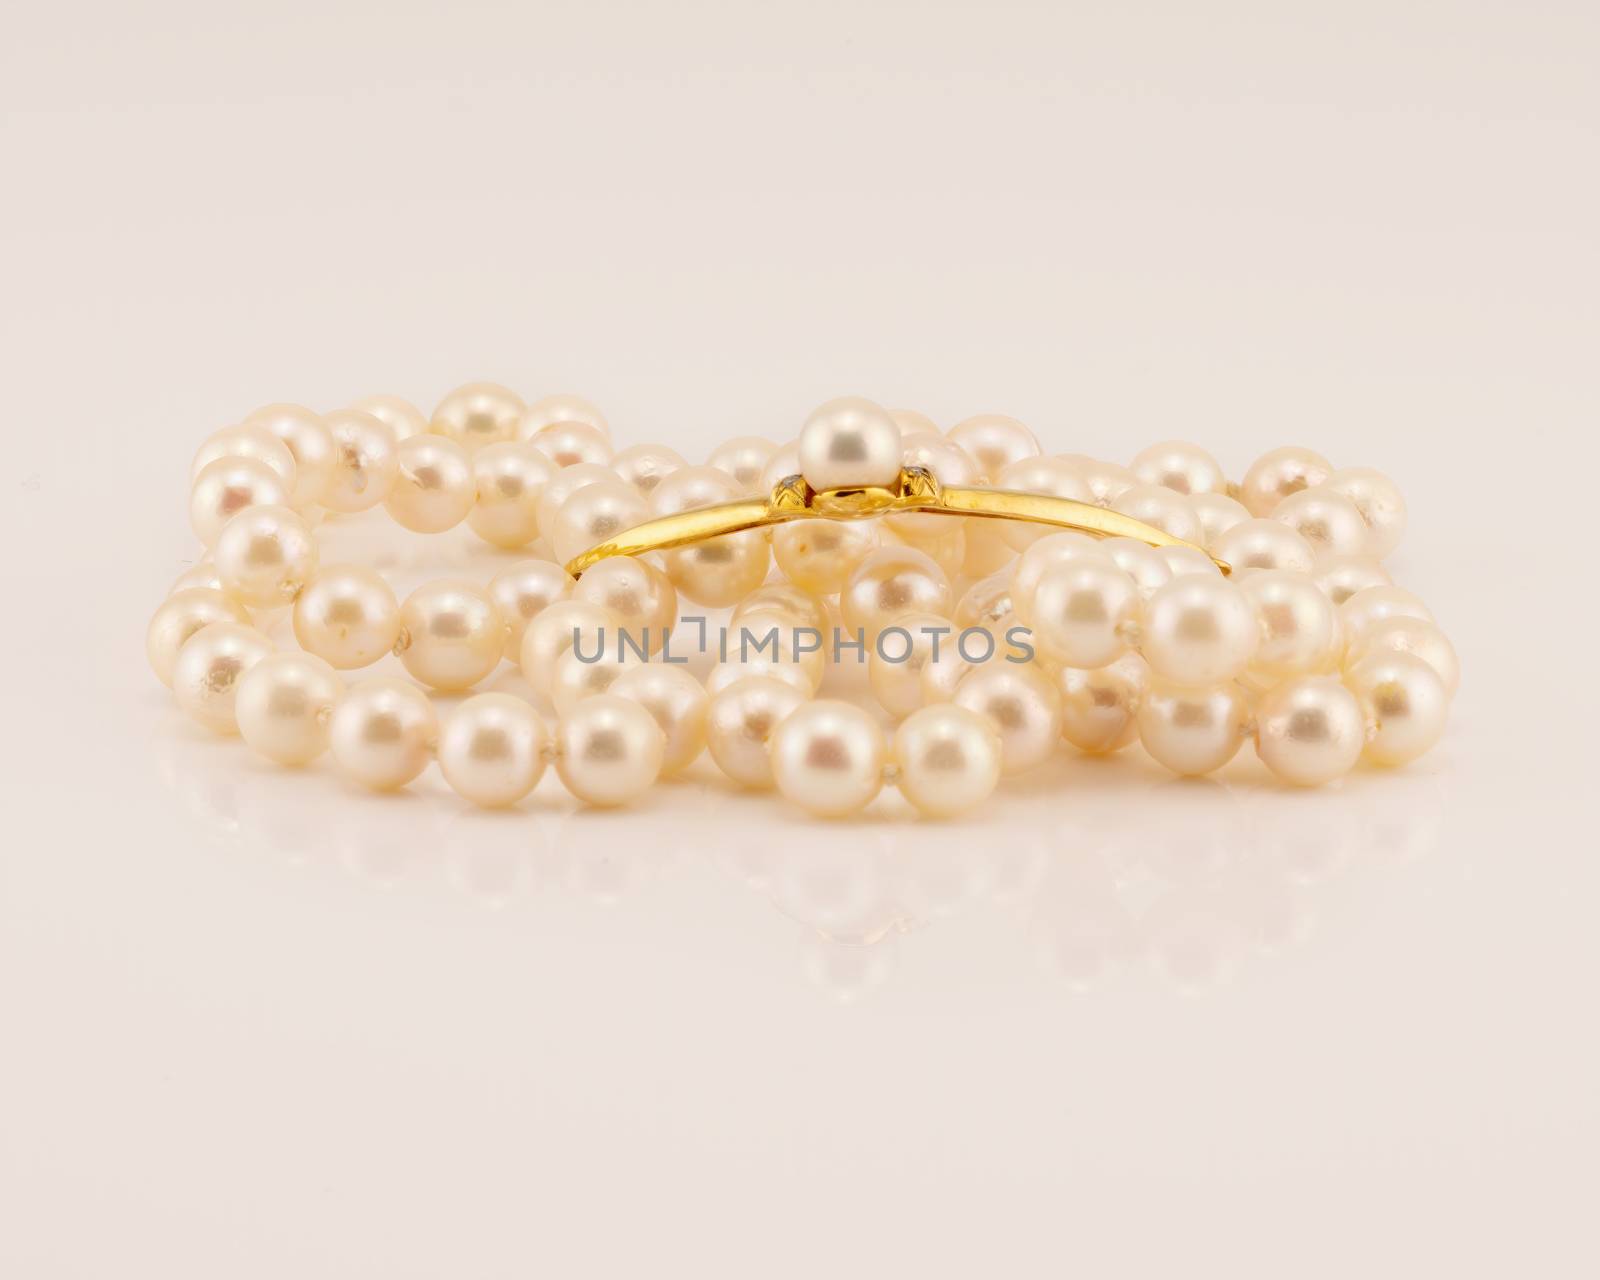 A string of lustrously glowing natural pearls designed as a necklace with a yellow gold bar center feature adorned with a pearl, isolated on a white background